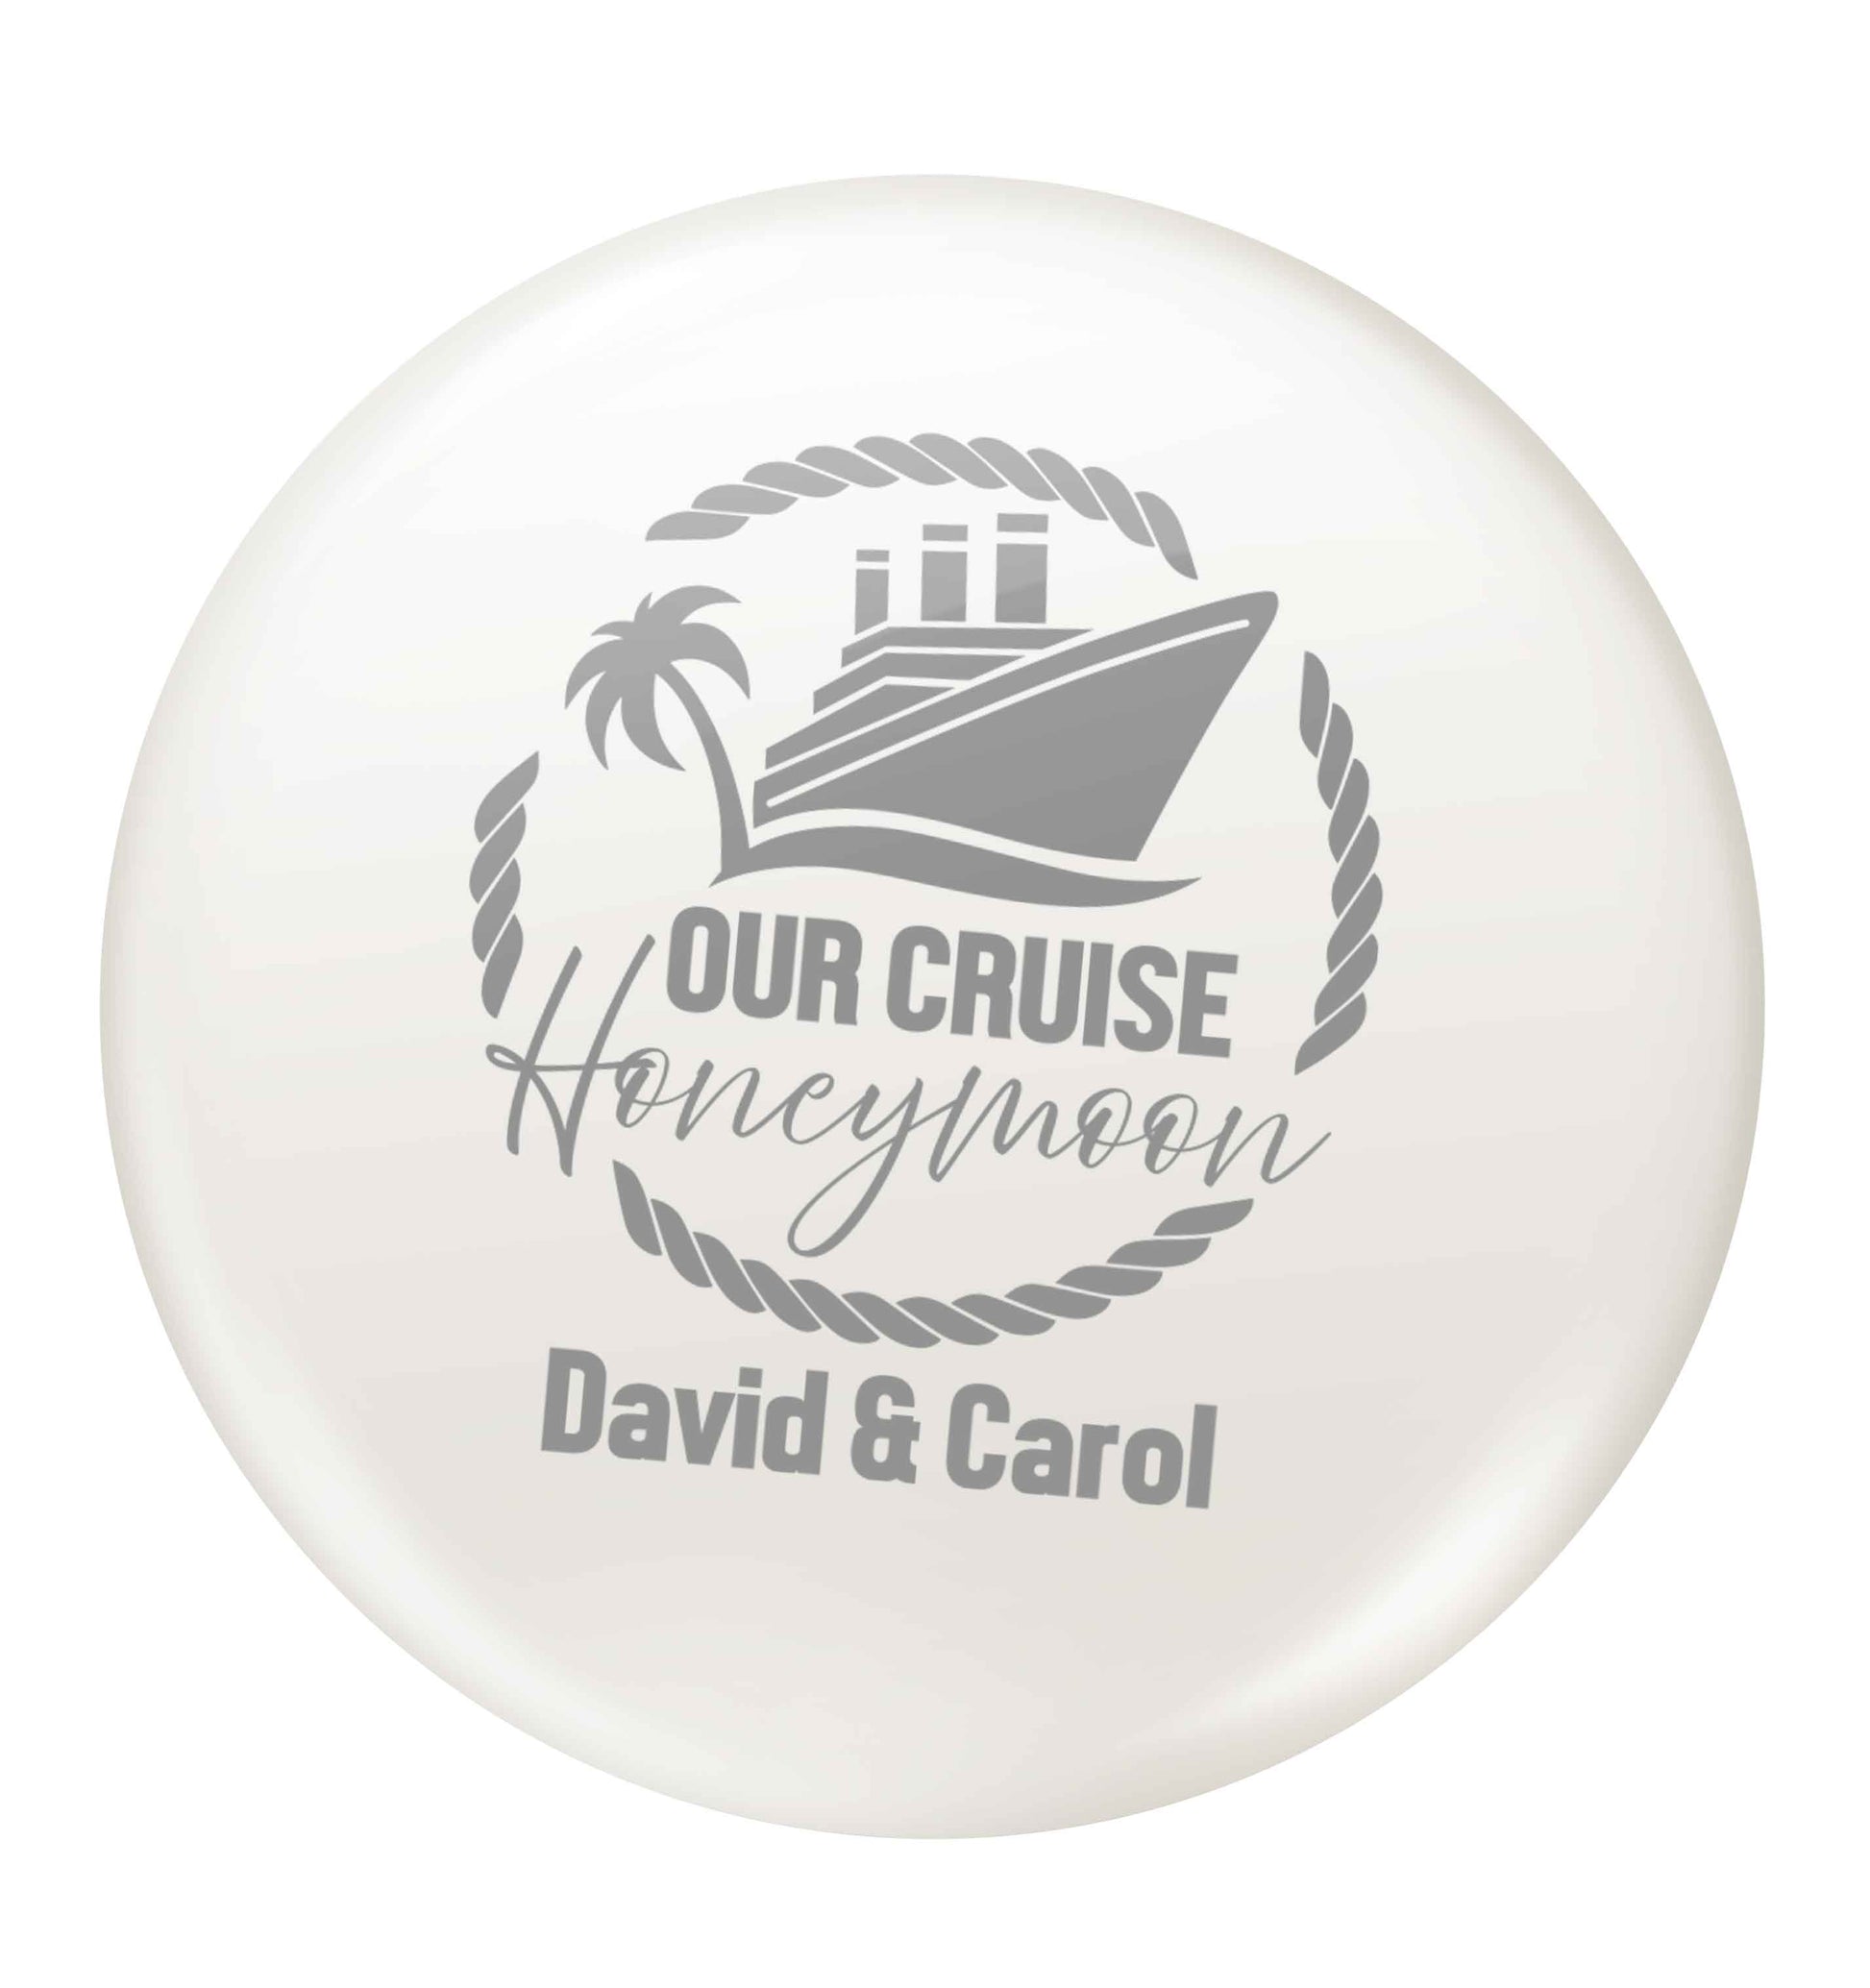 Our cruise honeymoon personalised small 25mm Pin badge